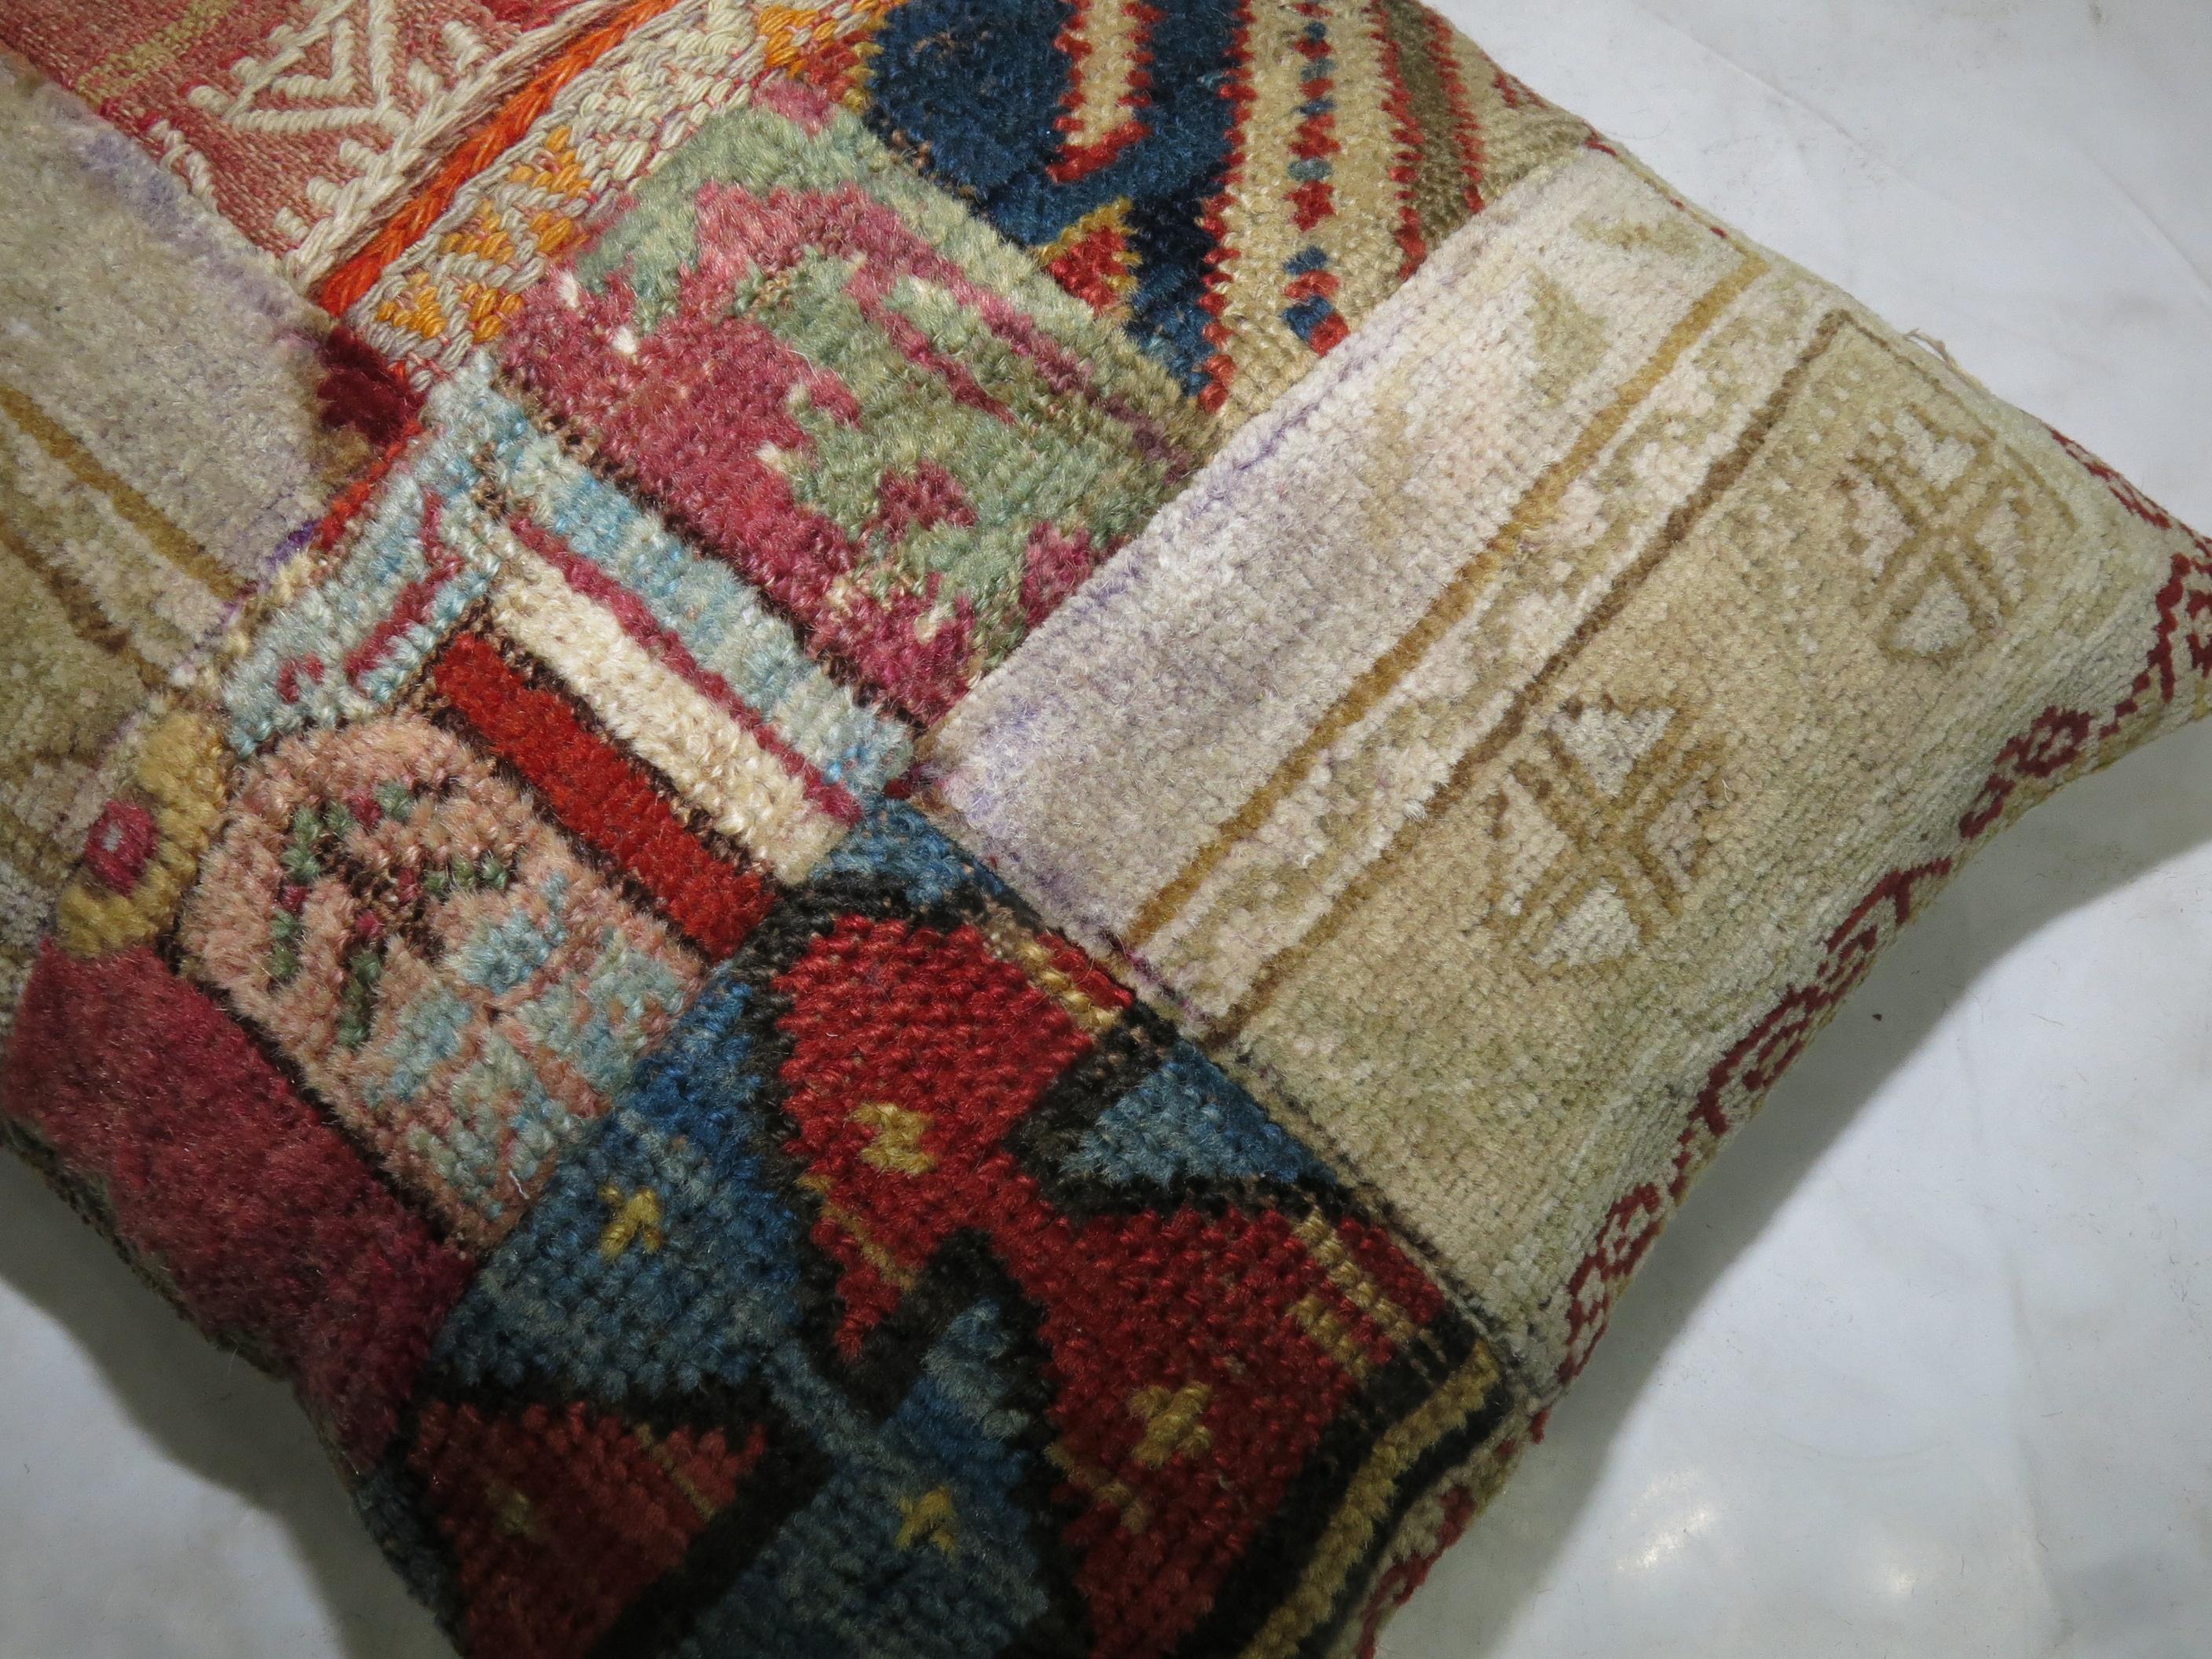 Pillow made from an assortment of antique Persian and tribal Caucasian rugs.

16'' x 19''